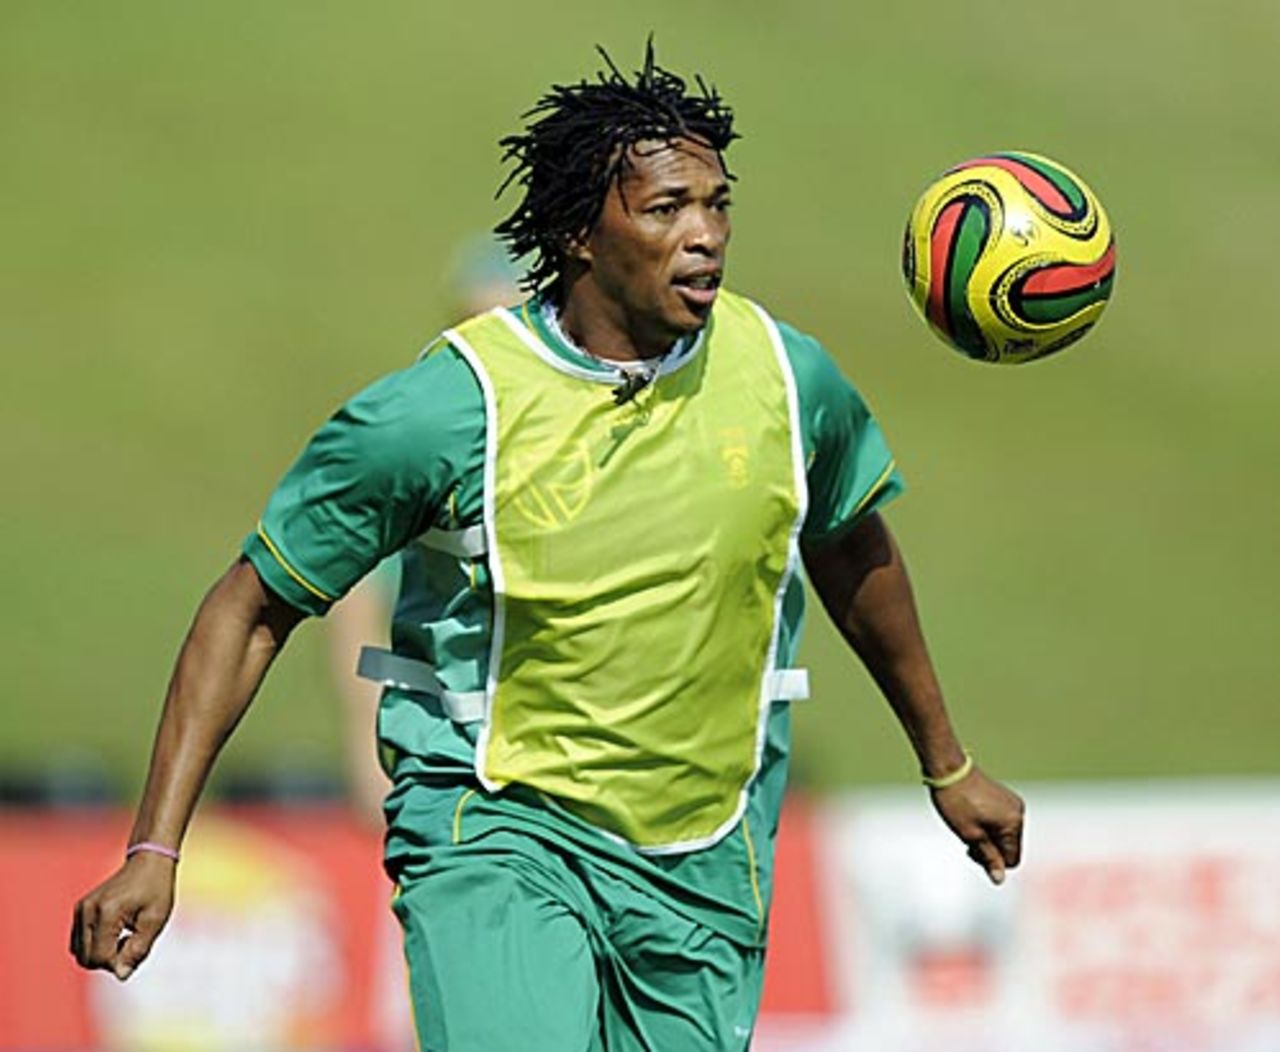 Makhaya Ntini warms up with a football, Centurion, September 21, 2009